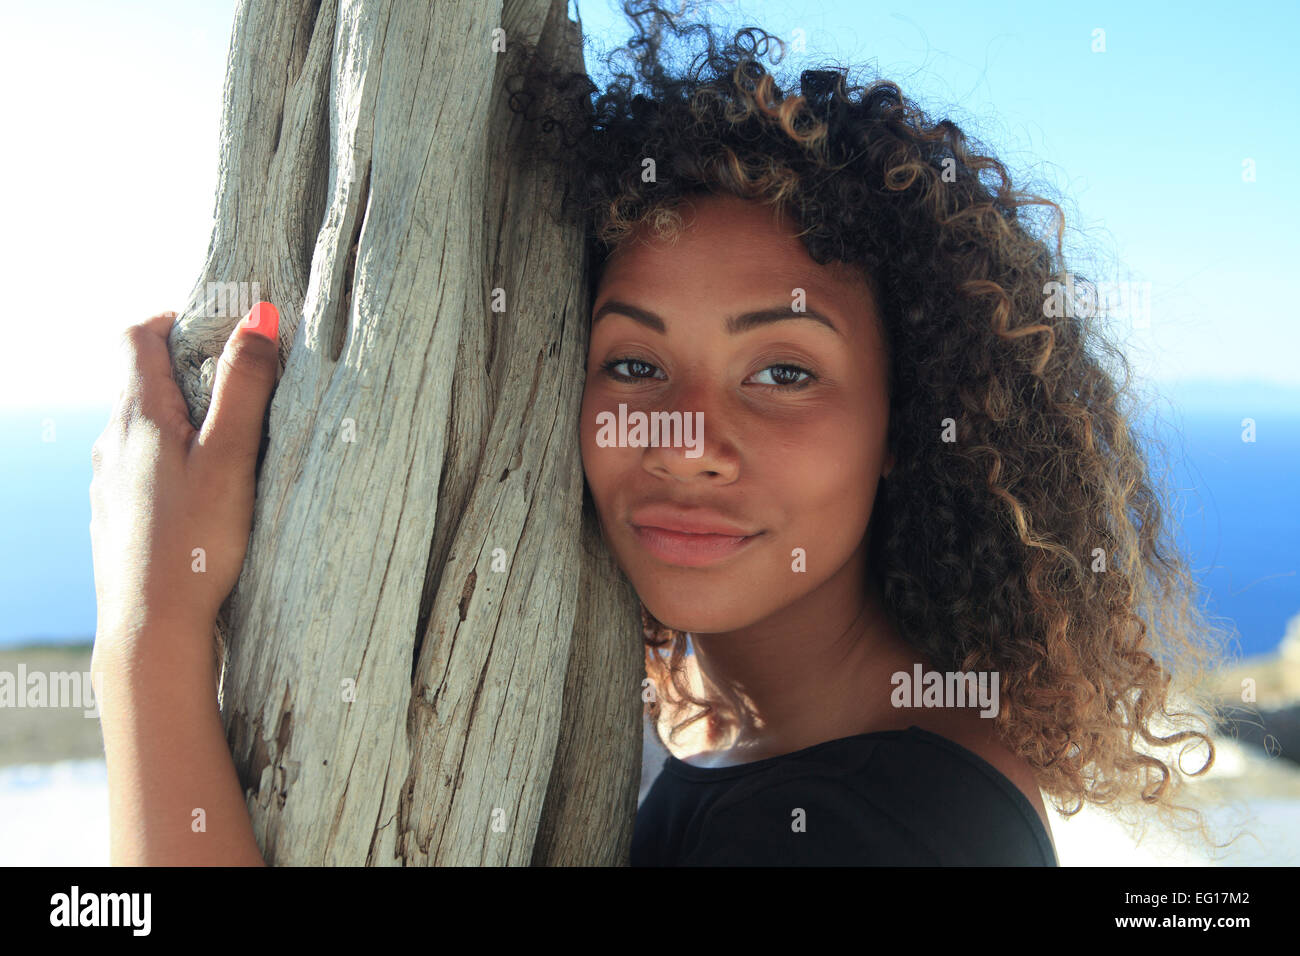 2. Mixed Race Girl Blue Hair Images, Stock Photos & Vectors - wide 5